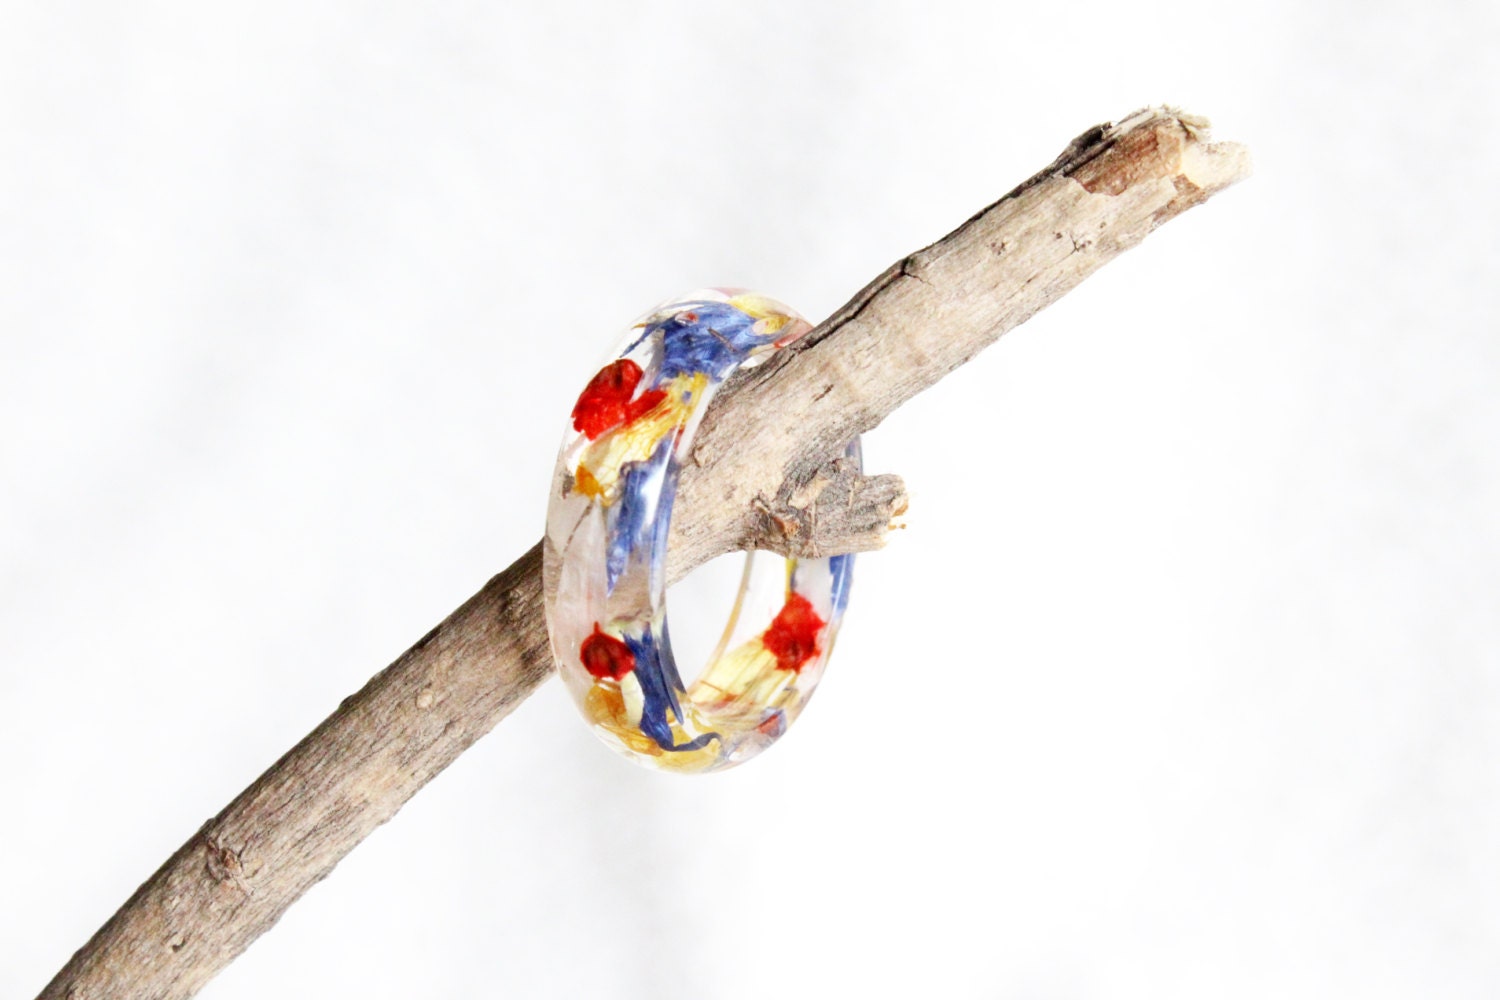 Real Colorful Flower Ring, Resin Ring, Resin Jewelry, Nature Ring, Flower Jewelry, Flower Ring, Fairy Ring, Pressed Flower Jewelry, Multicol